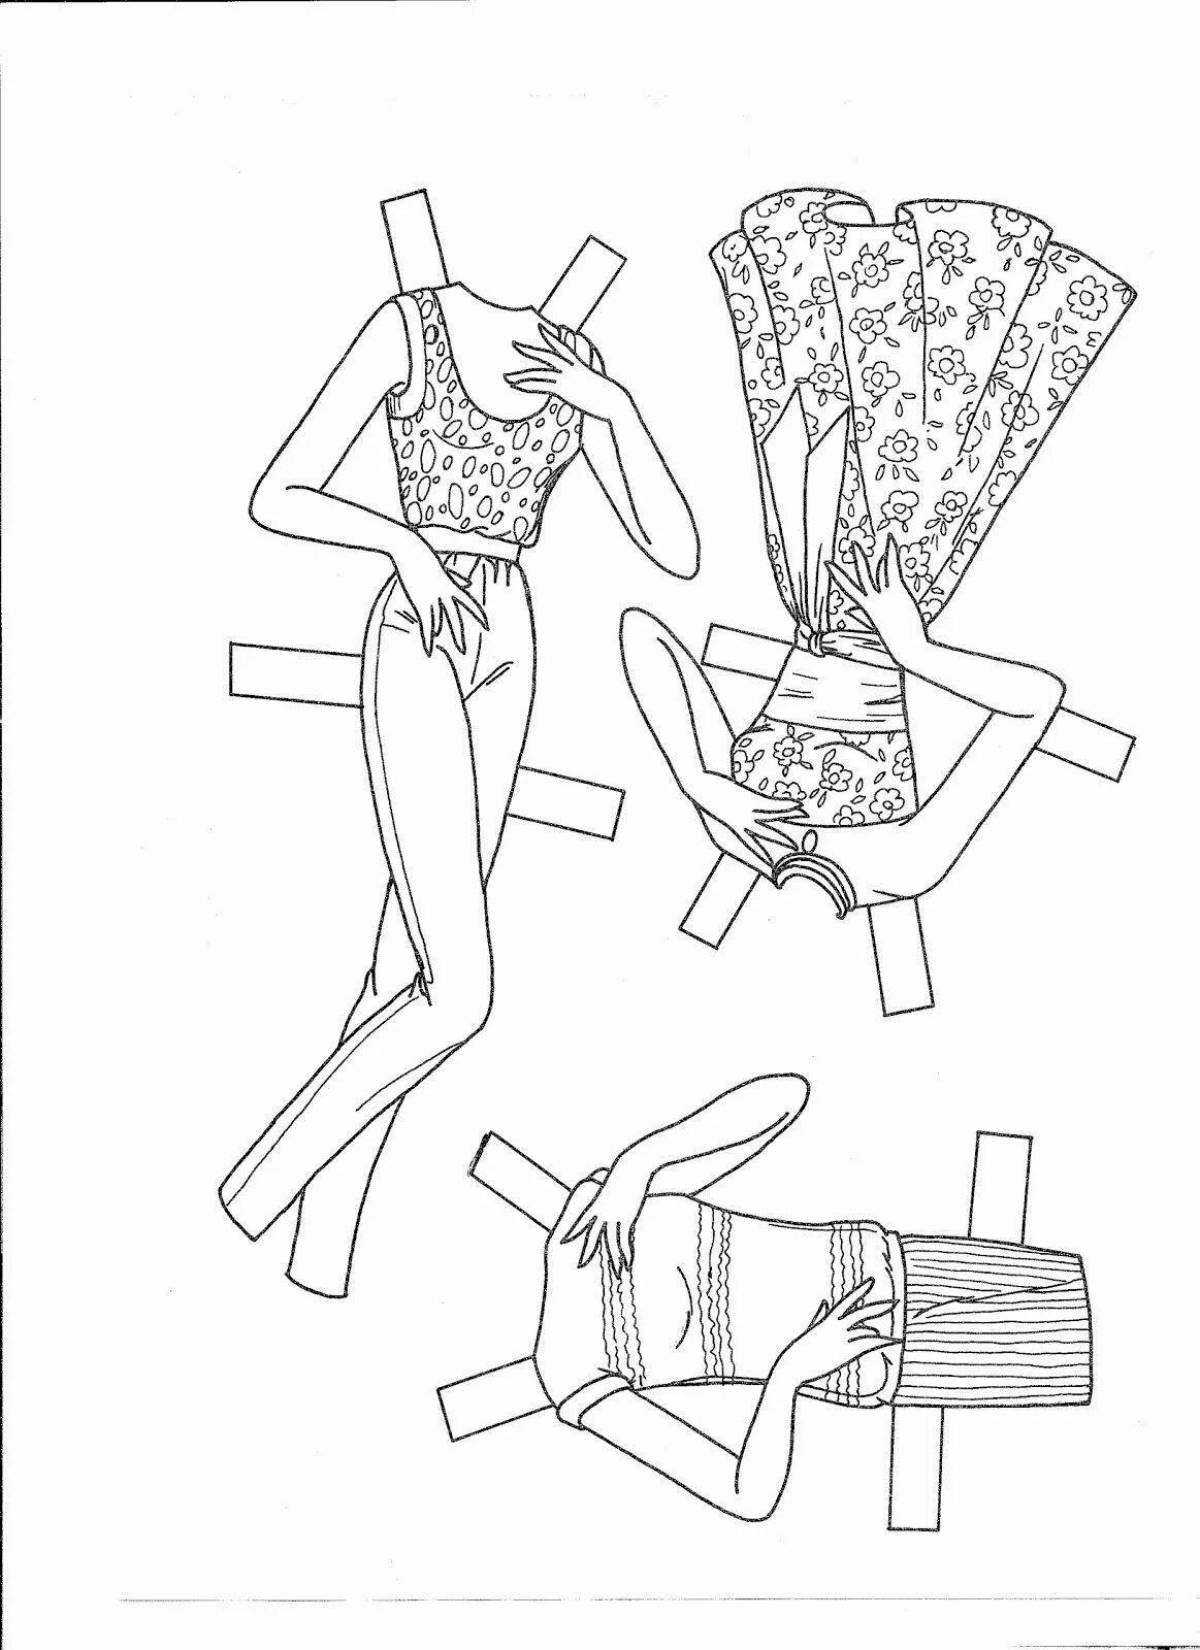 Coloring book amazing paper doll barbie